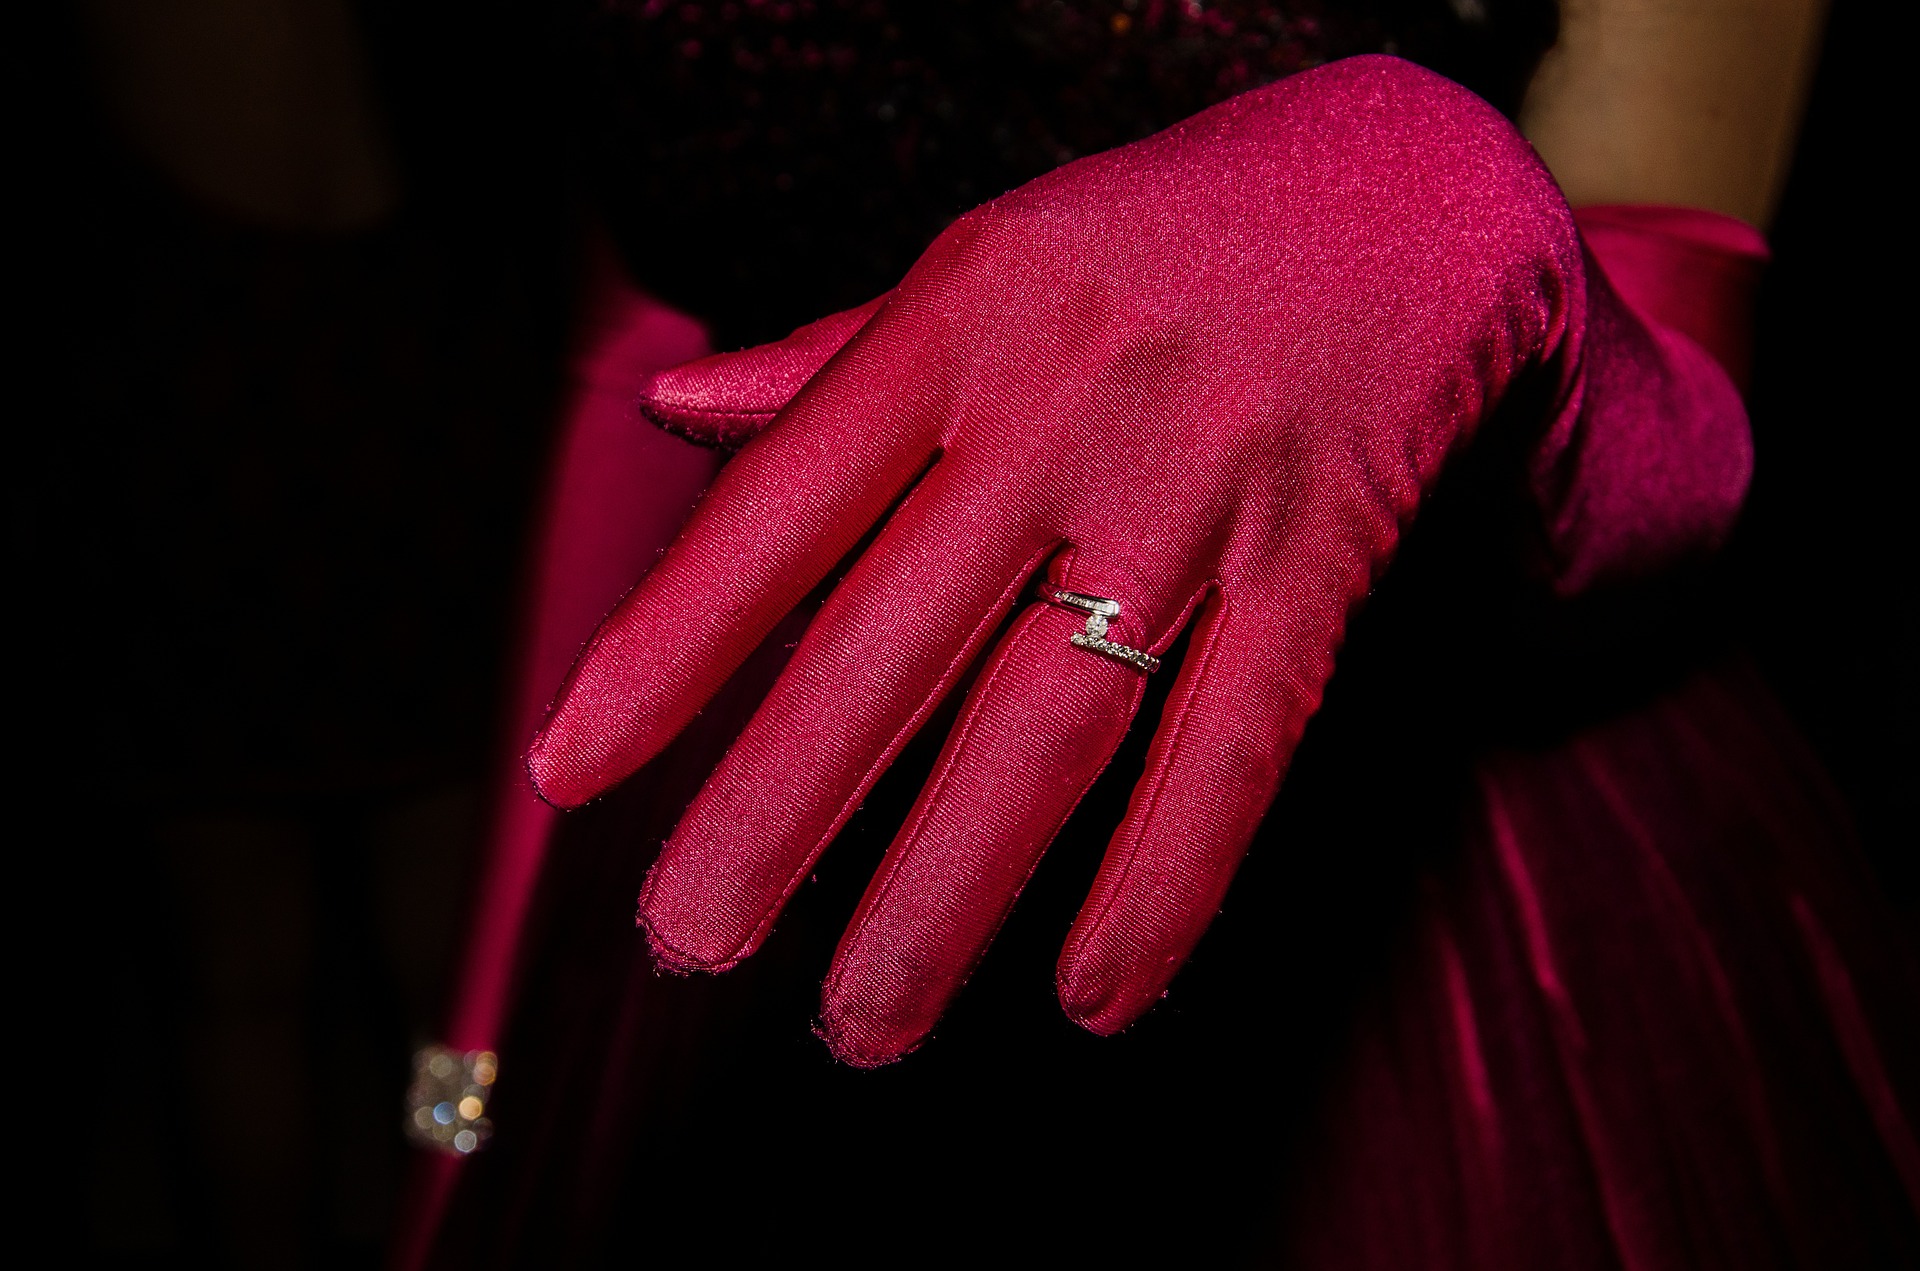 Hand with glove and ring